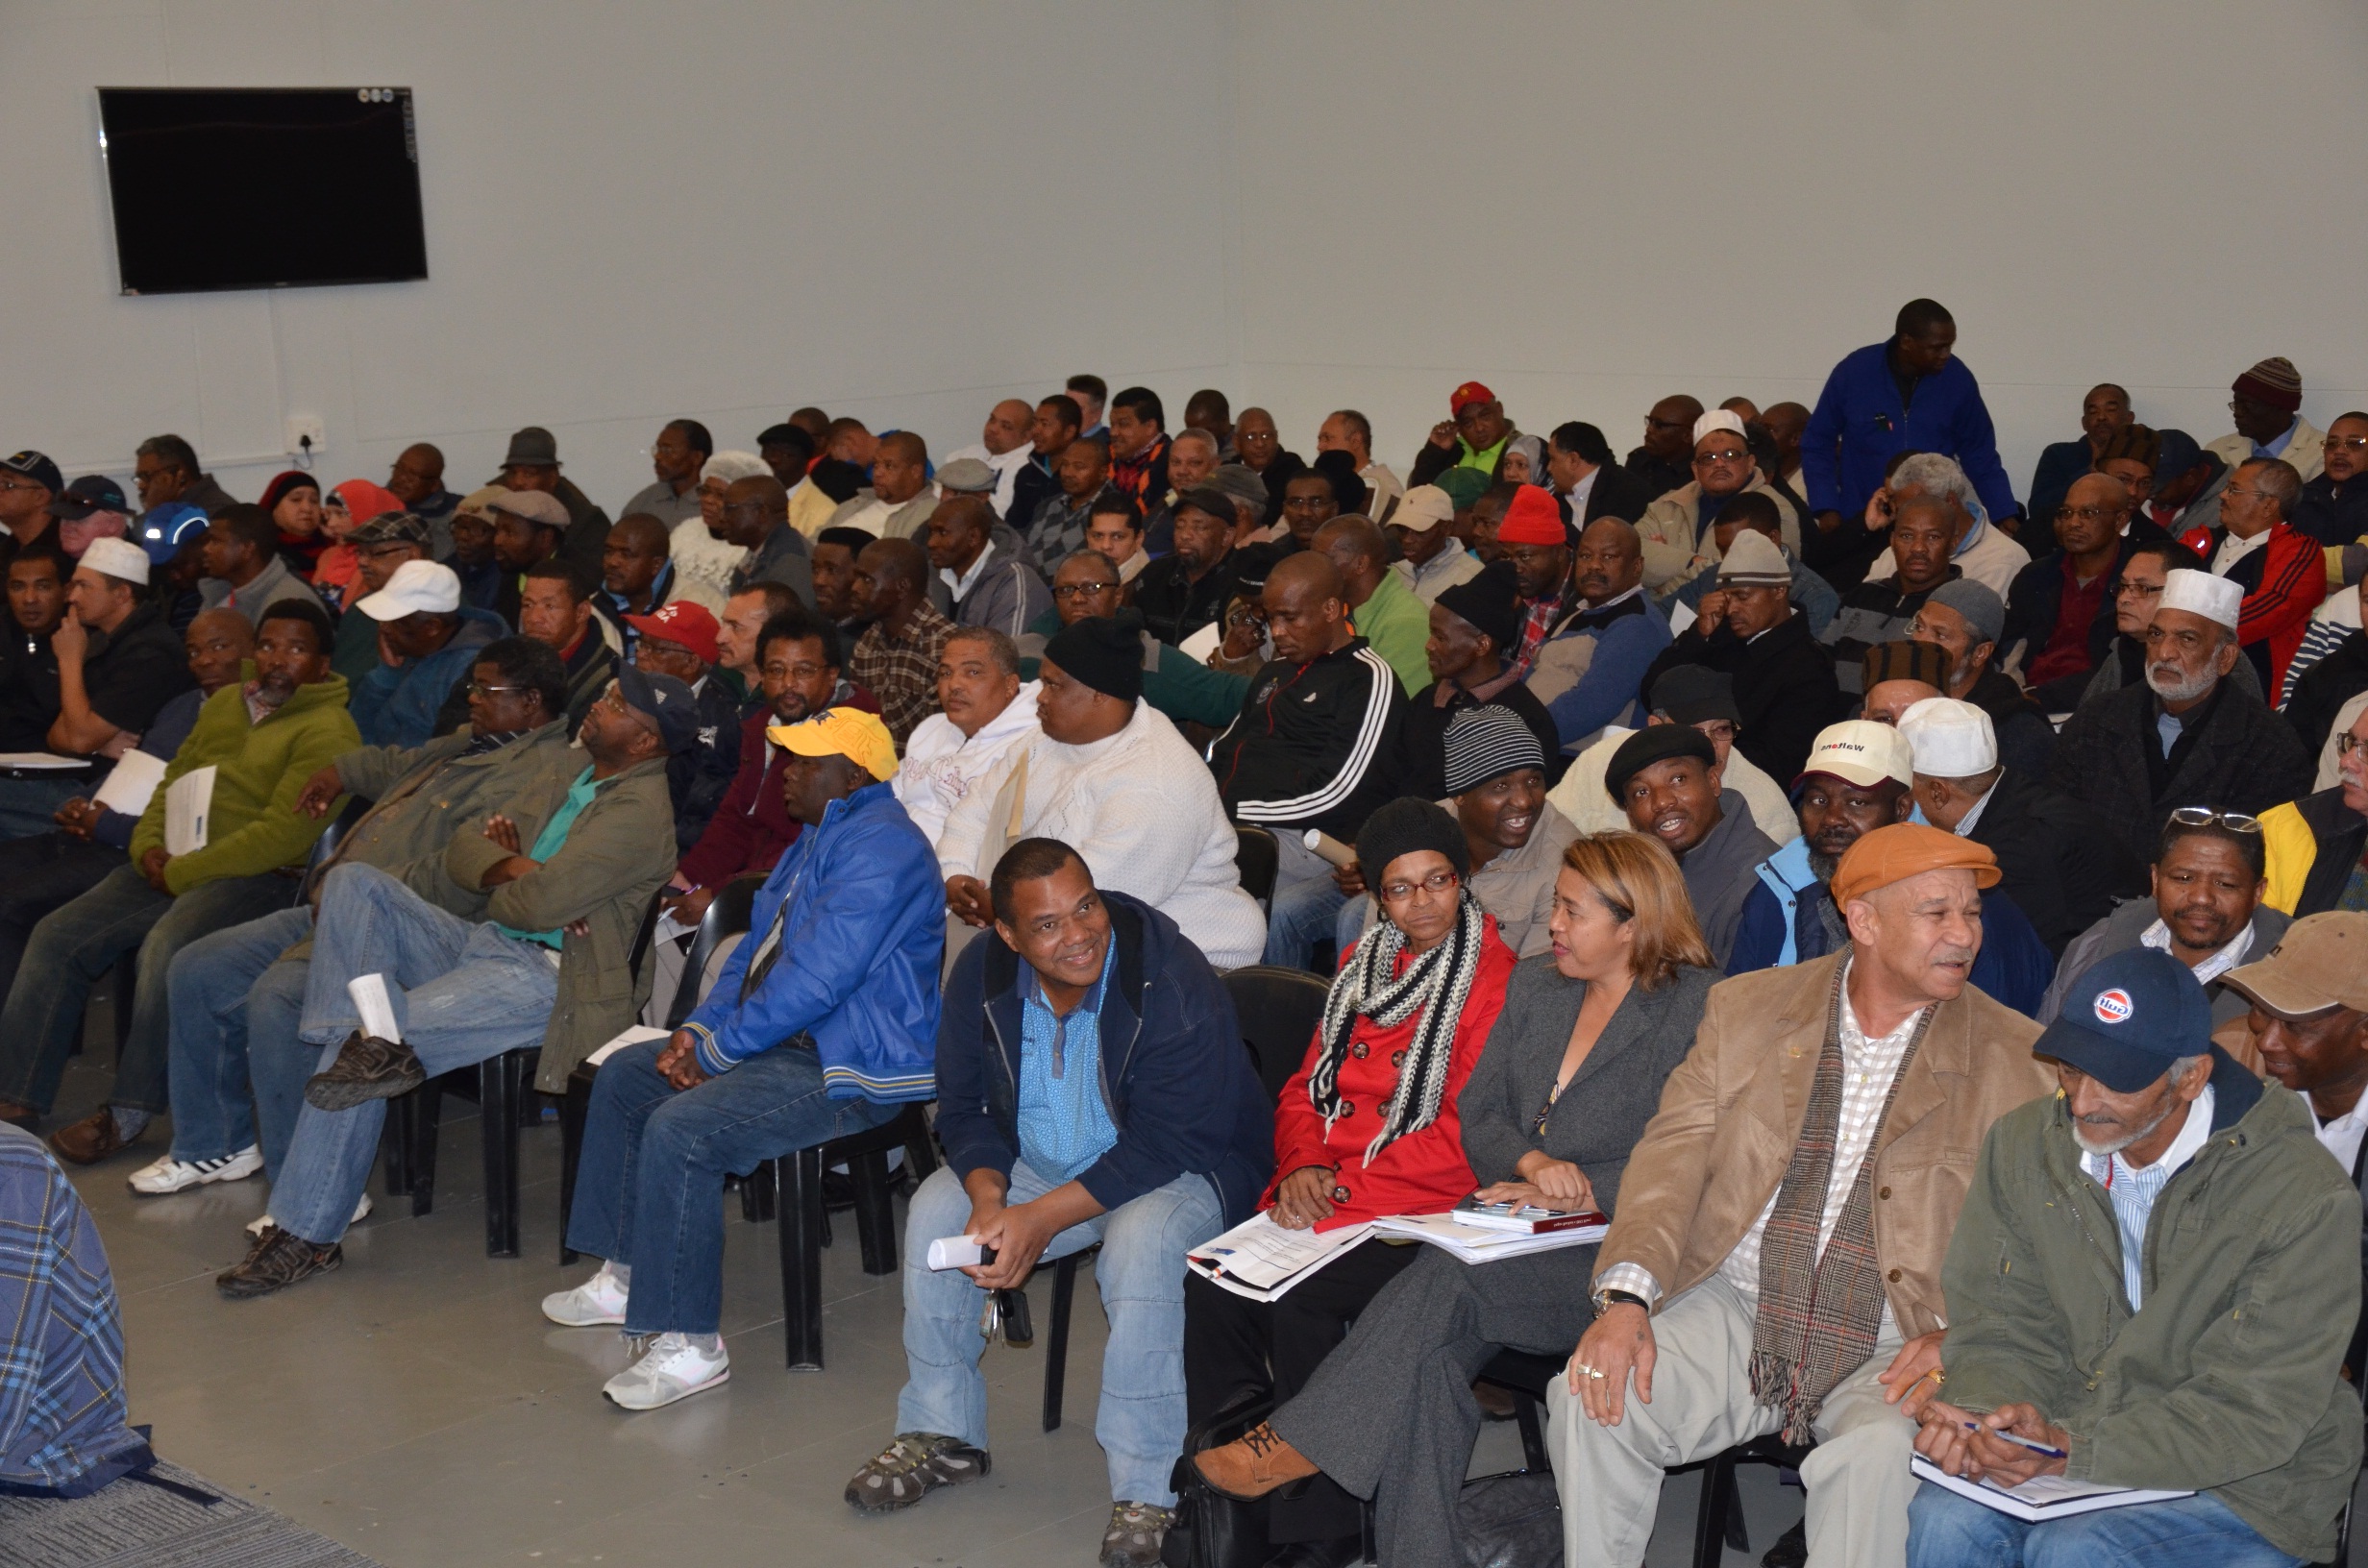 Representatives from approximately 139 taxi associations across the Province